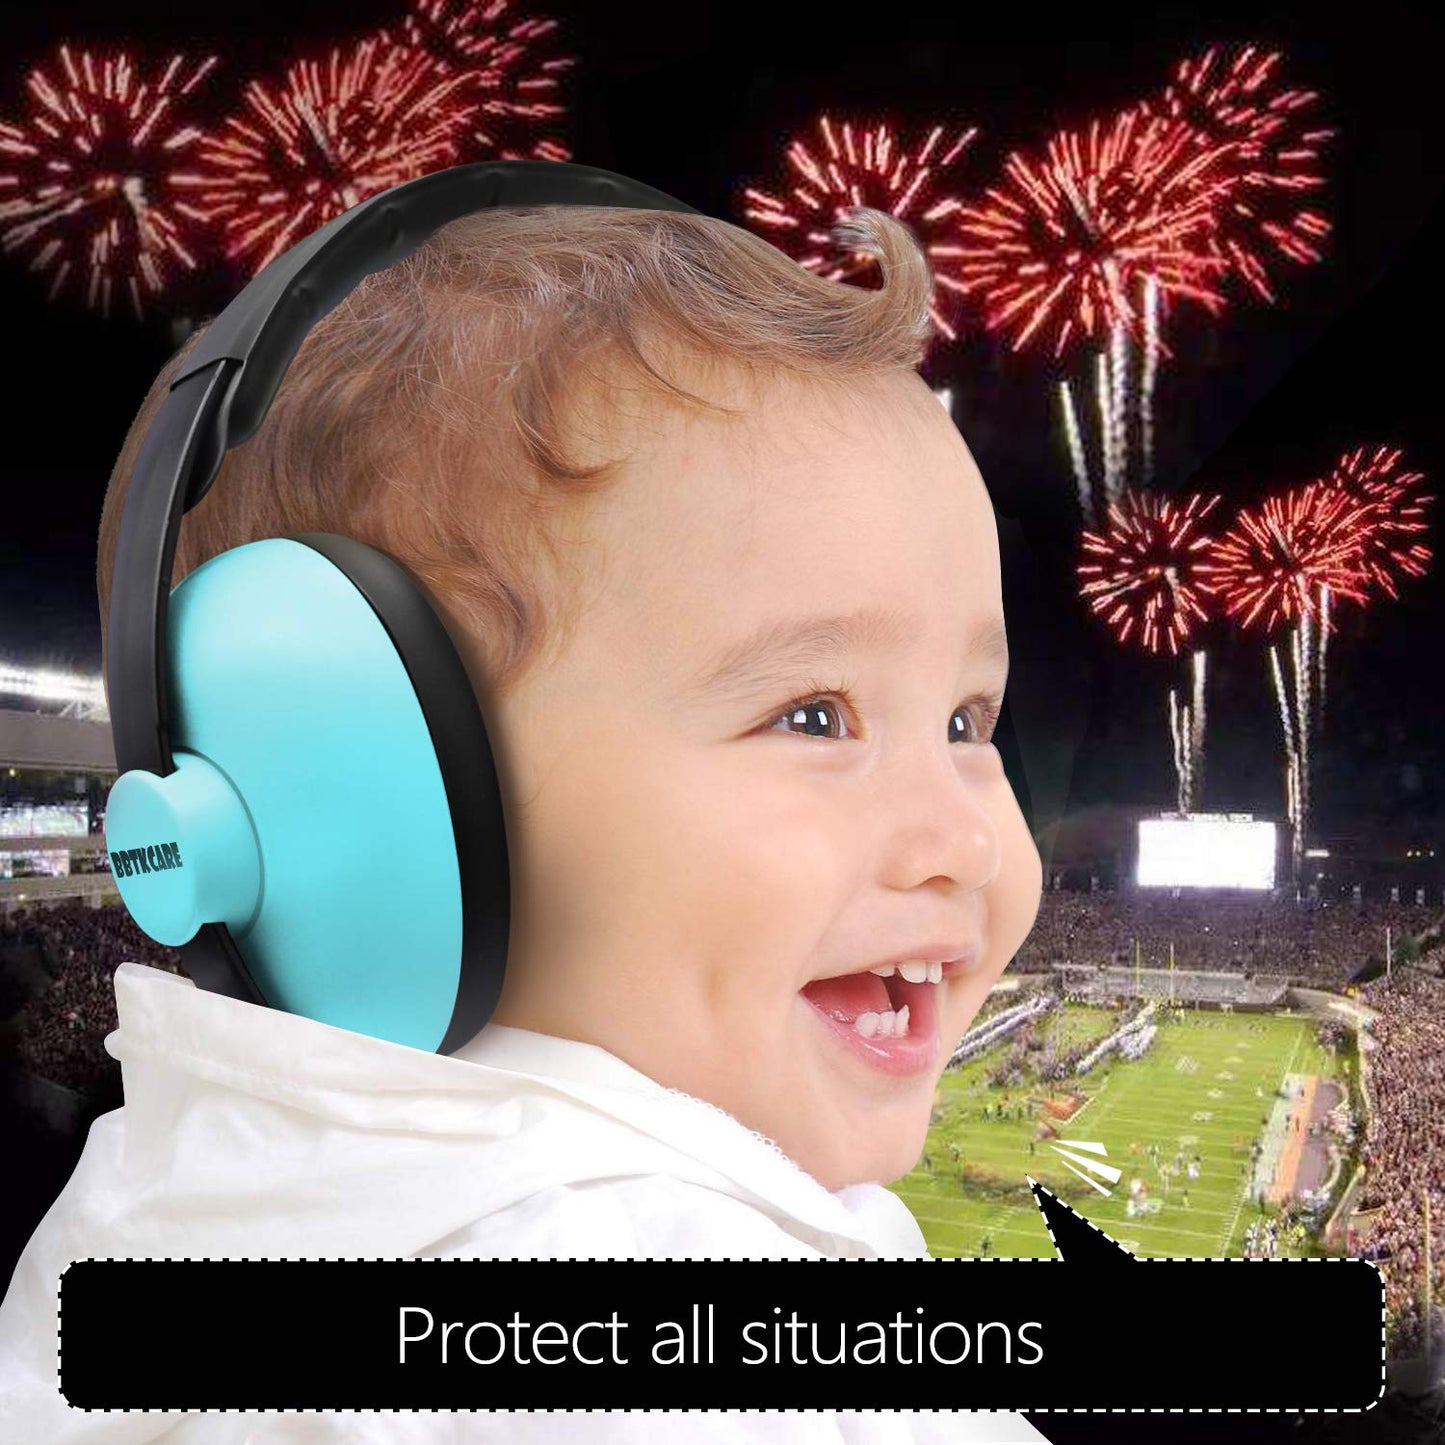 Baby Ear Protection Noise Cancelling HeadPhones for Babies for 3 Months to 2 Years (Blue)